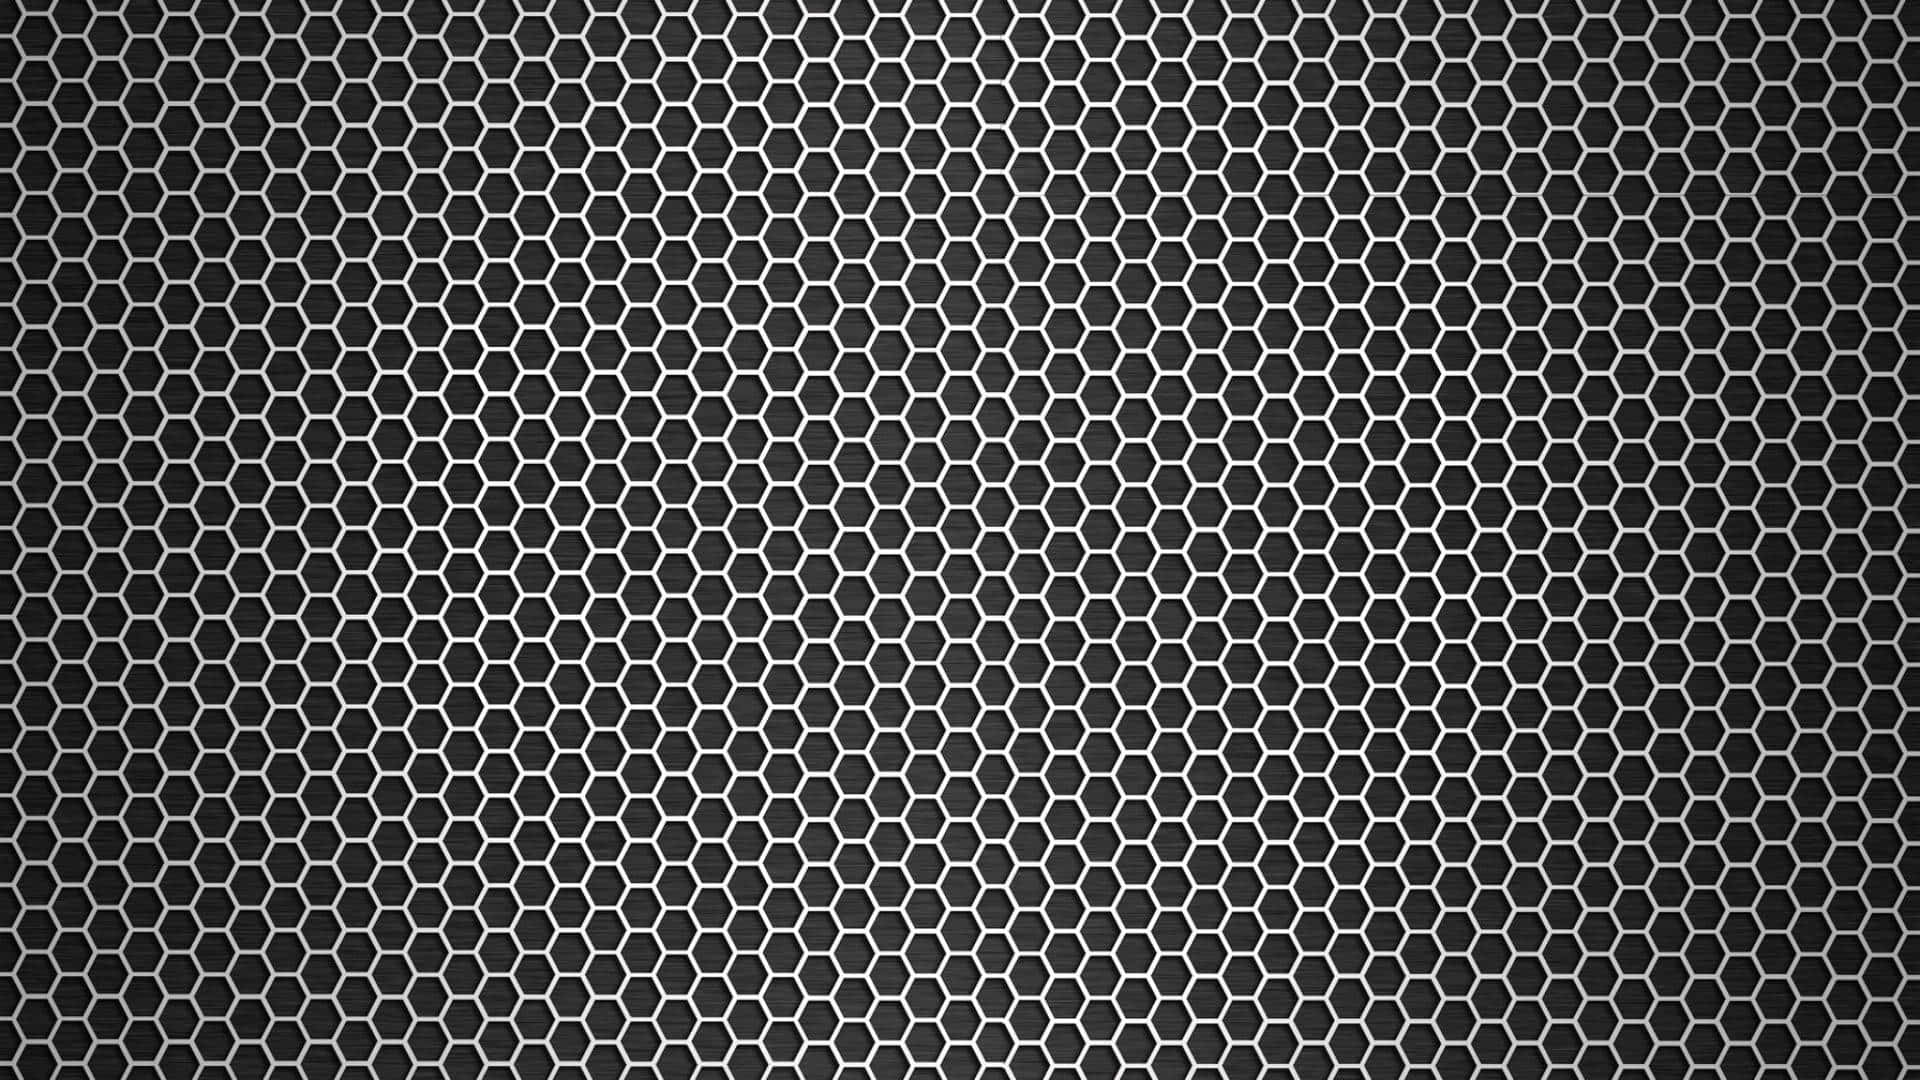 A Black Metal Mesh Background With Holes